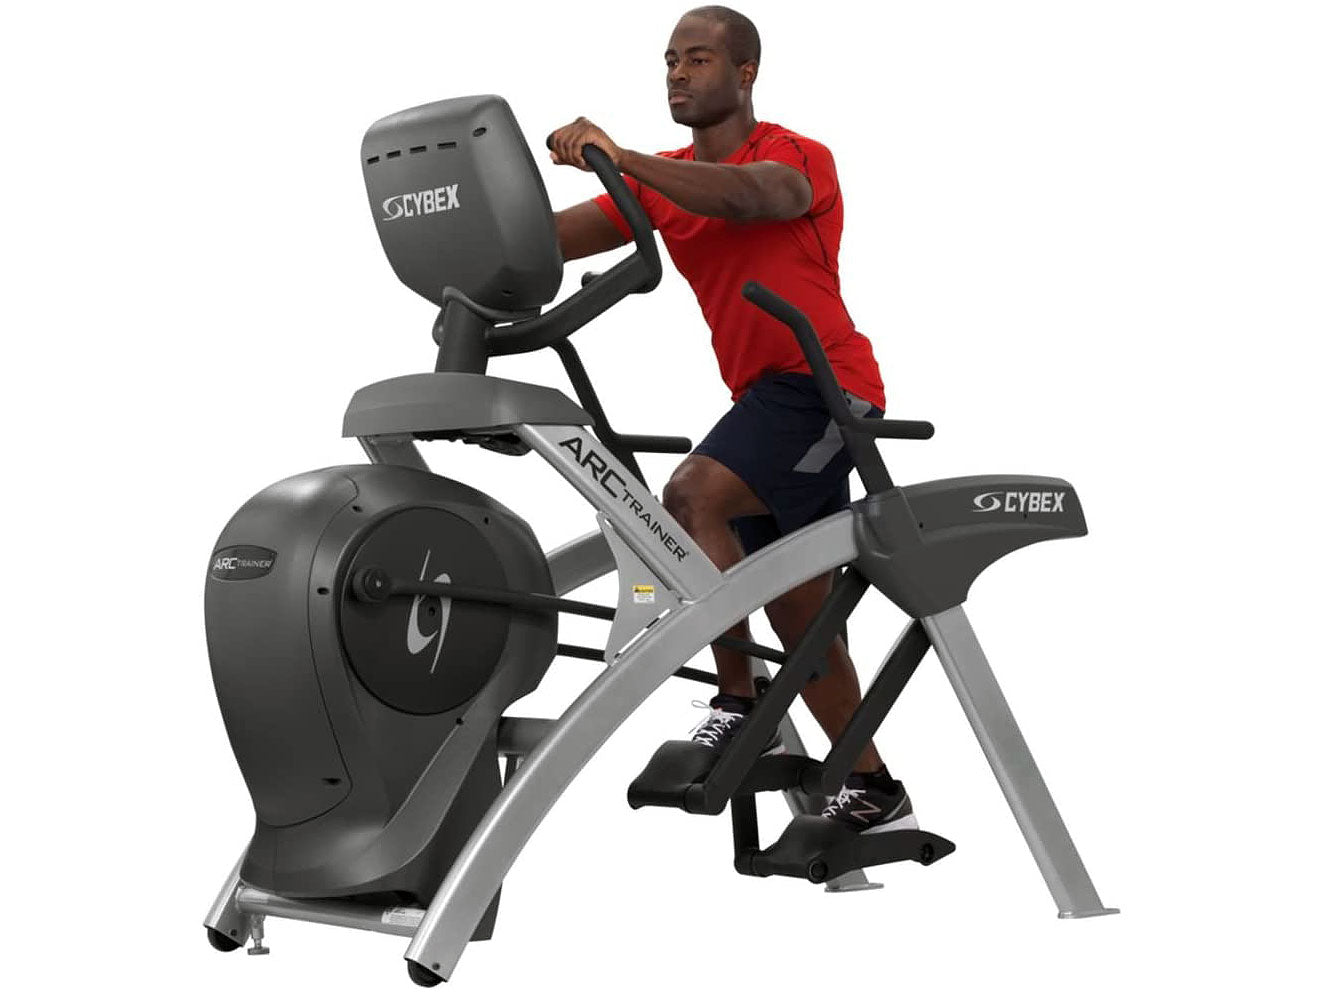 Factory photo of a Used Cybex 625A Lower Body Arc Trainer